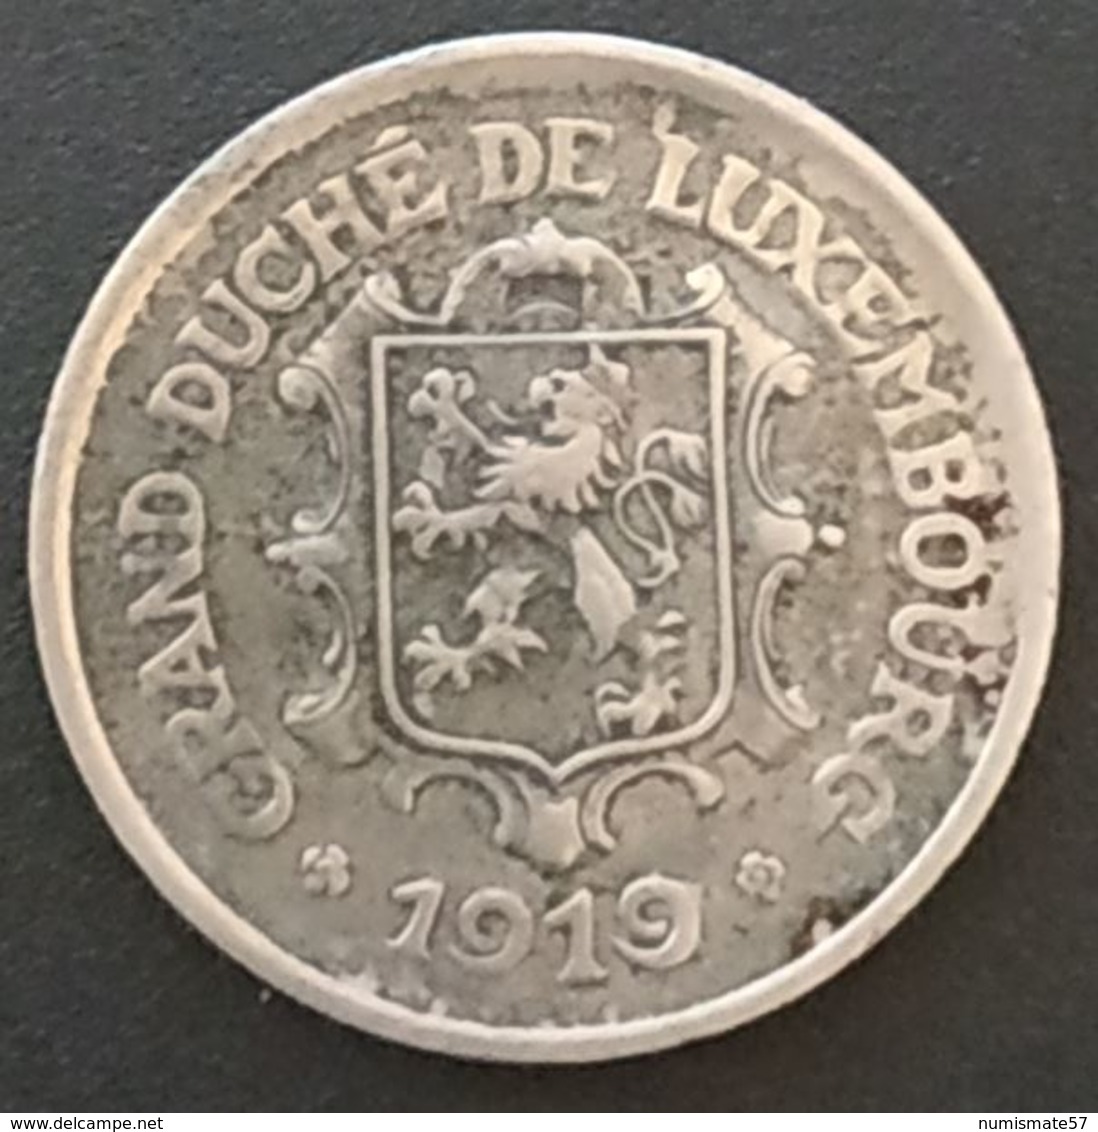 LUXEMBOURG - 25 CENTIMES 1919 - Fer - KM 32 - Luxembourg